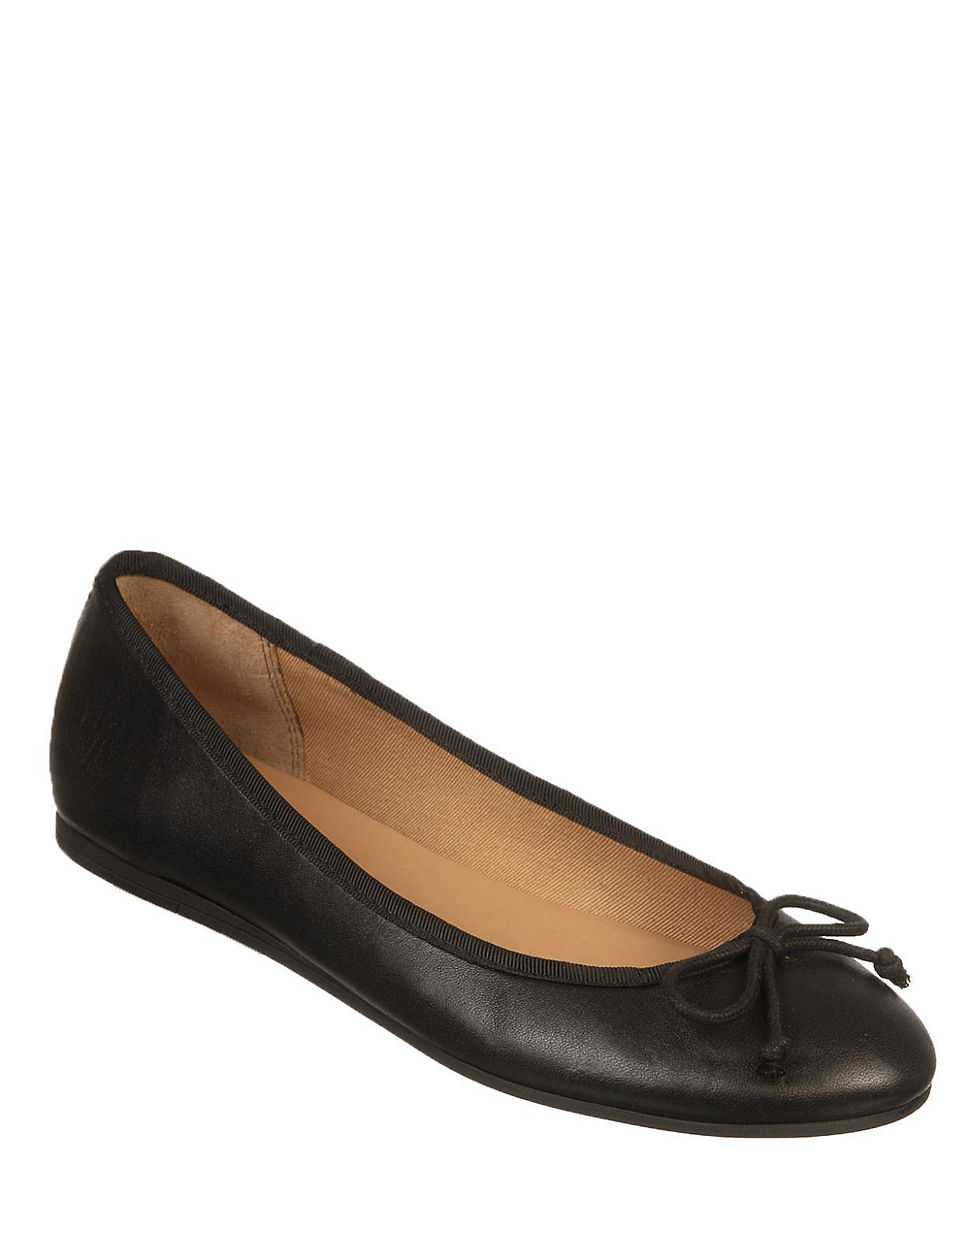 Franco Sarto Zapp Leather Ballet Flats With Bow Accent in Black | Lyst